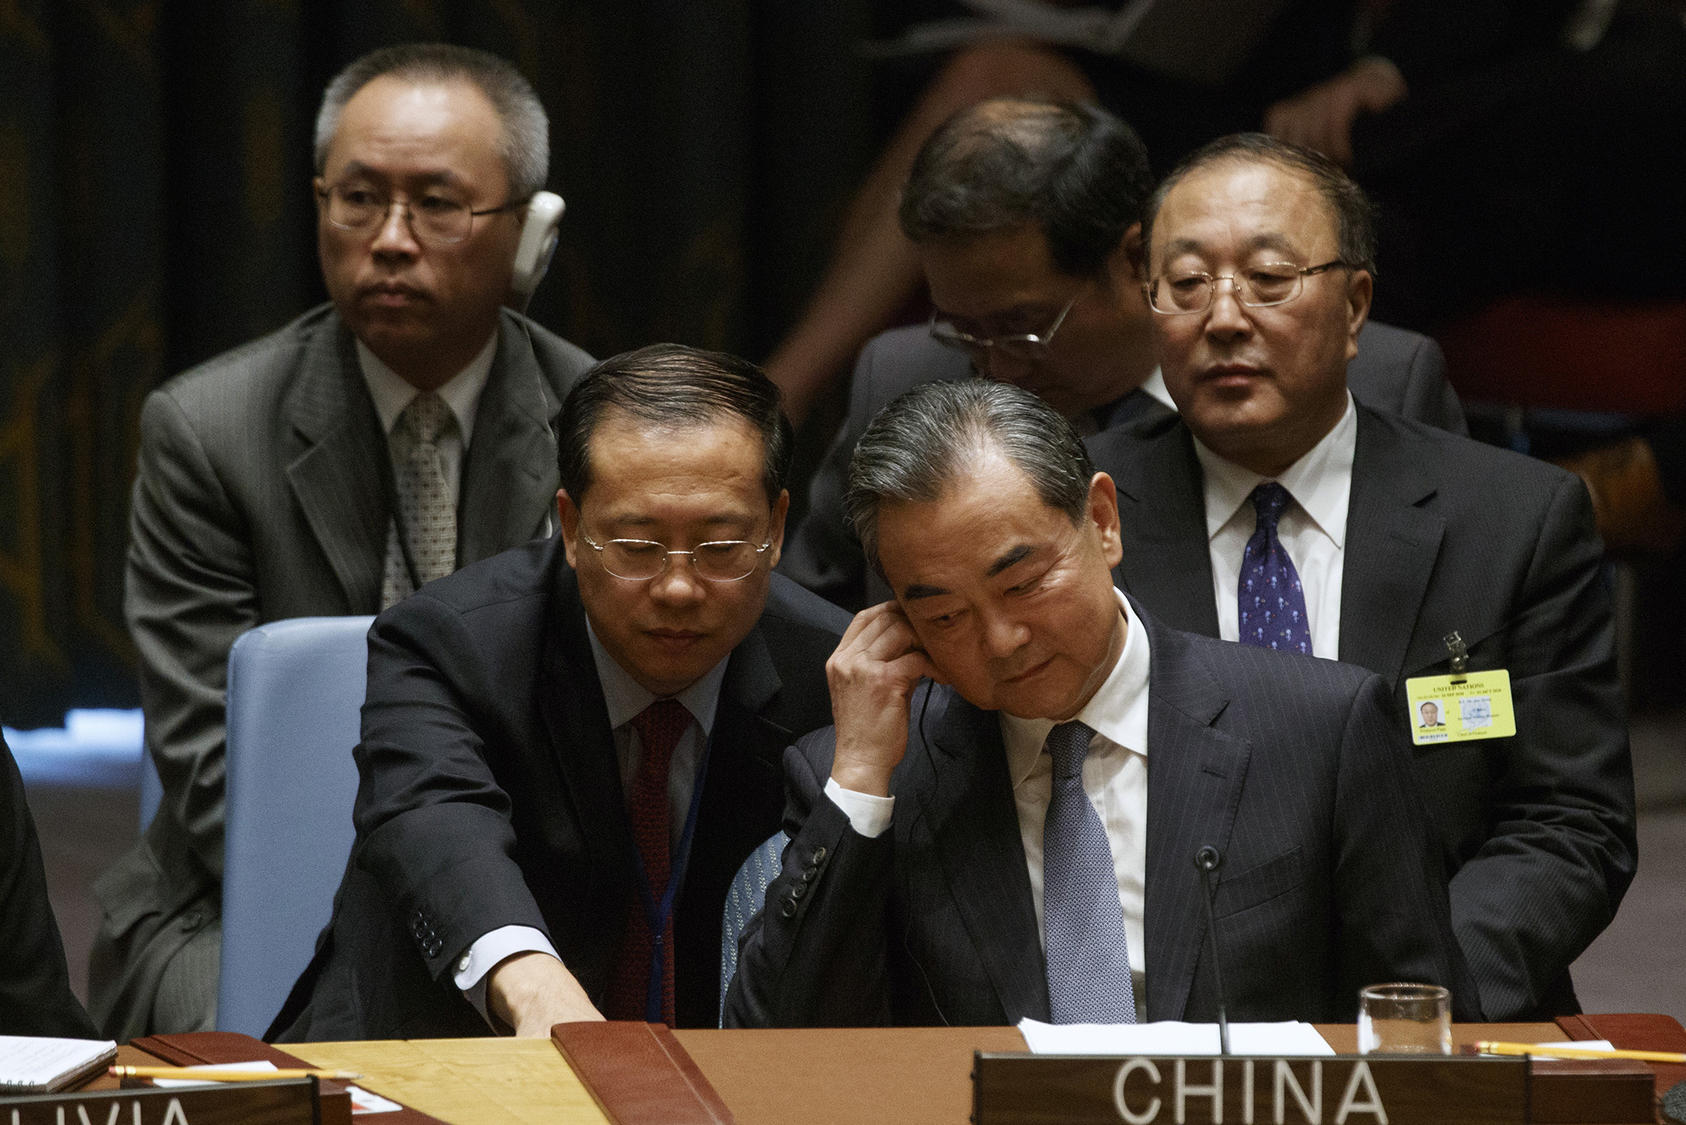 China’s foreign affairs minister, Wang Yi, seated at front right, confers with an aide at a United Nations Security Council meeting at U.N. headquarters in New York on Wednesday, Sept. 26, 2018. (Tom Brenner/The New York Times)